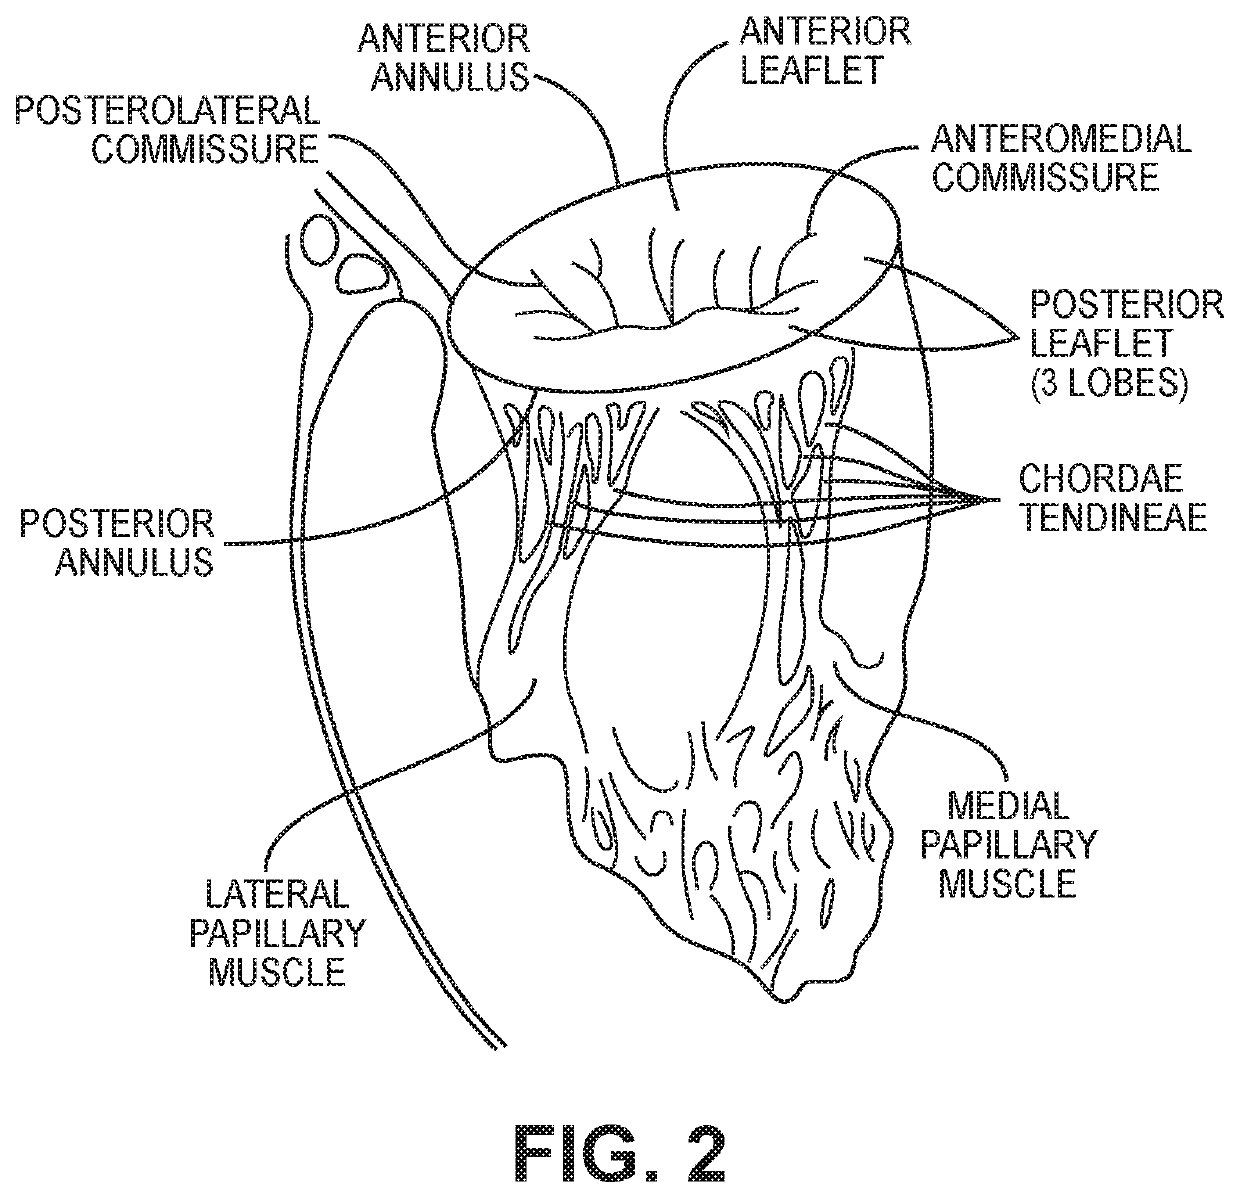 Hydrophilic skirt for paravalvular leak mitigation and fit and apposition optimization for prosthetic heart valve implants